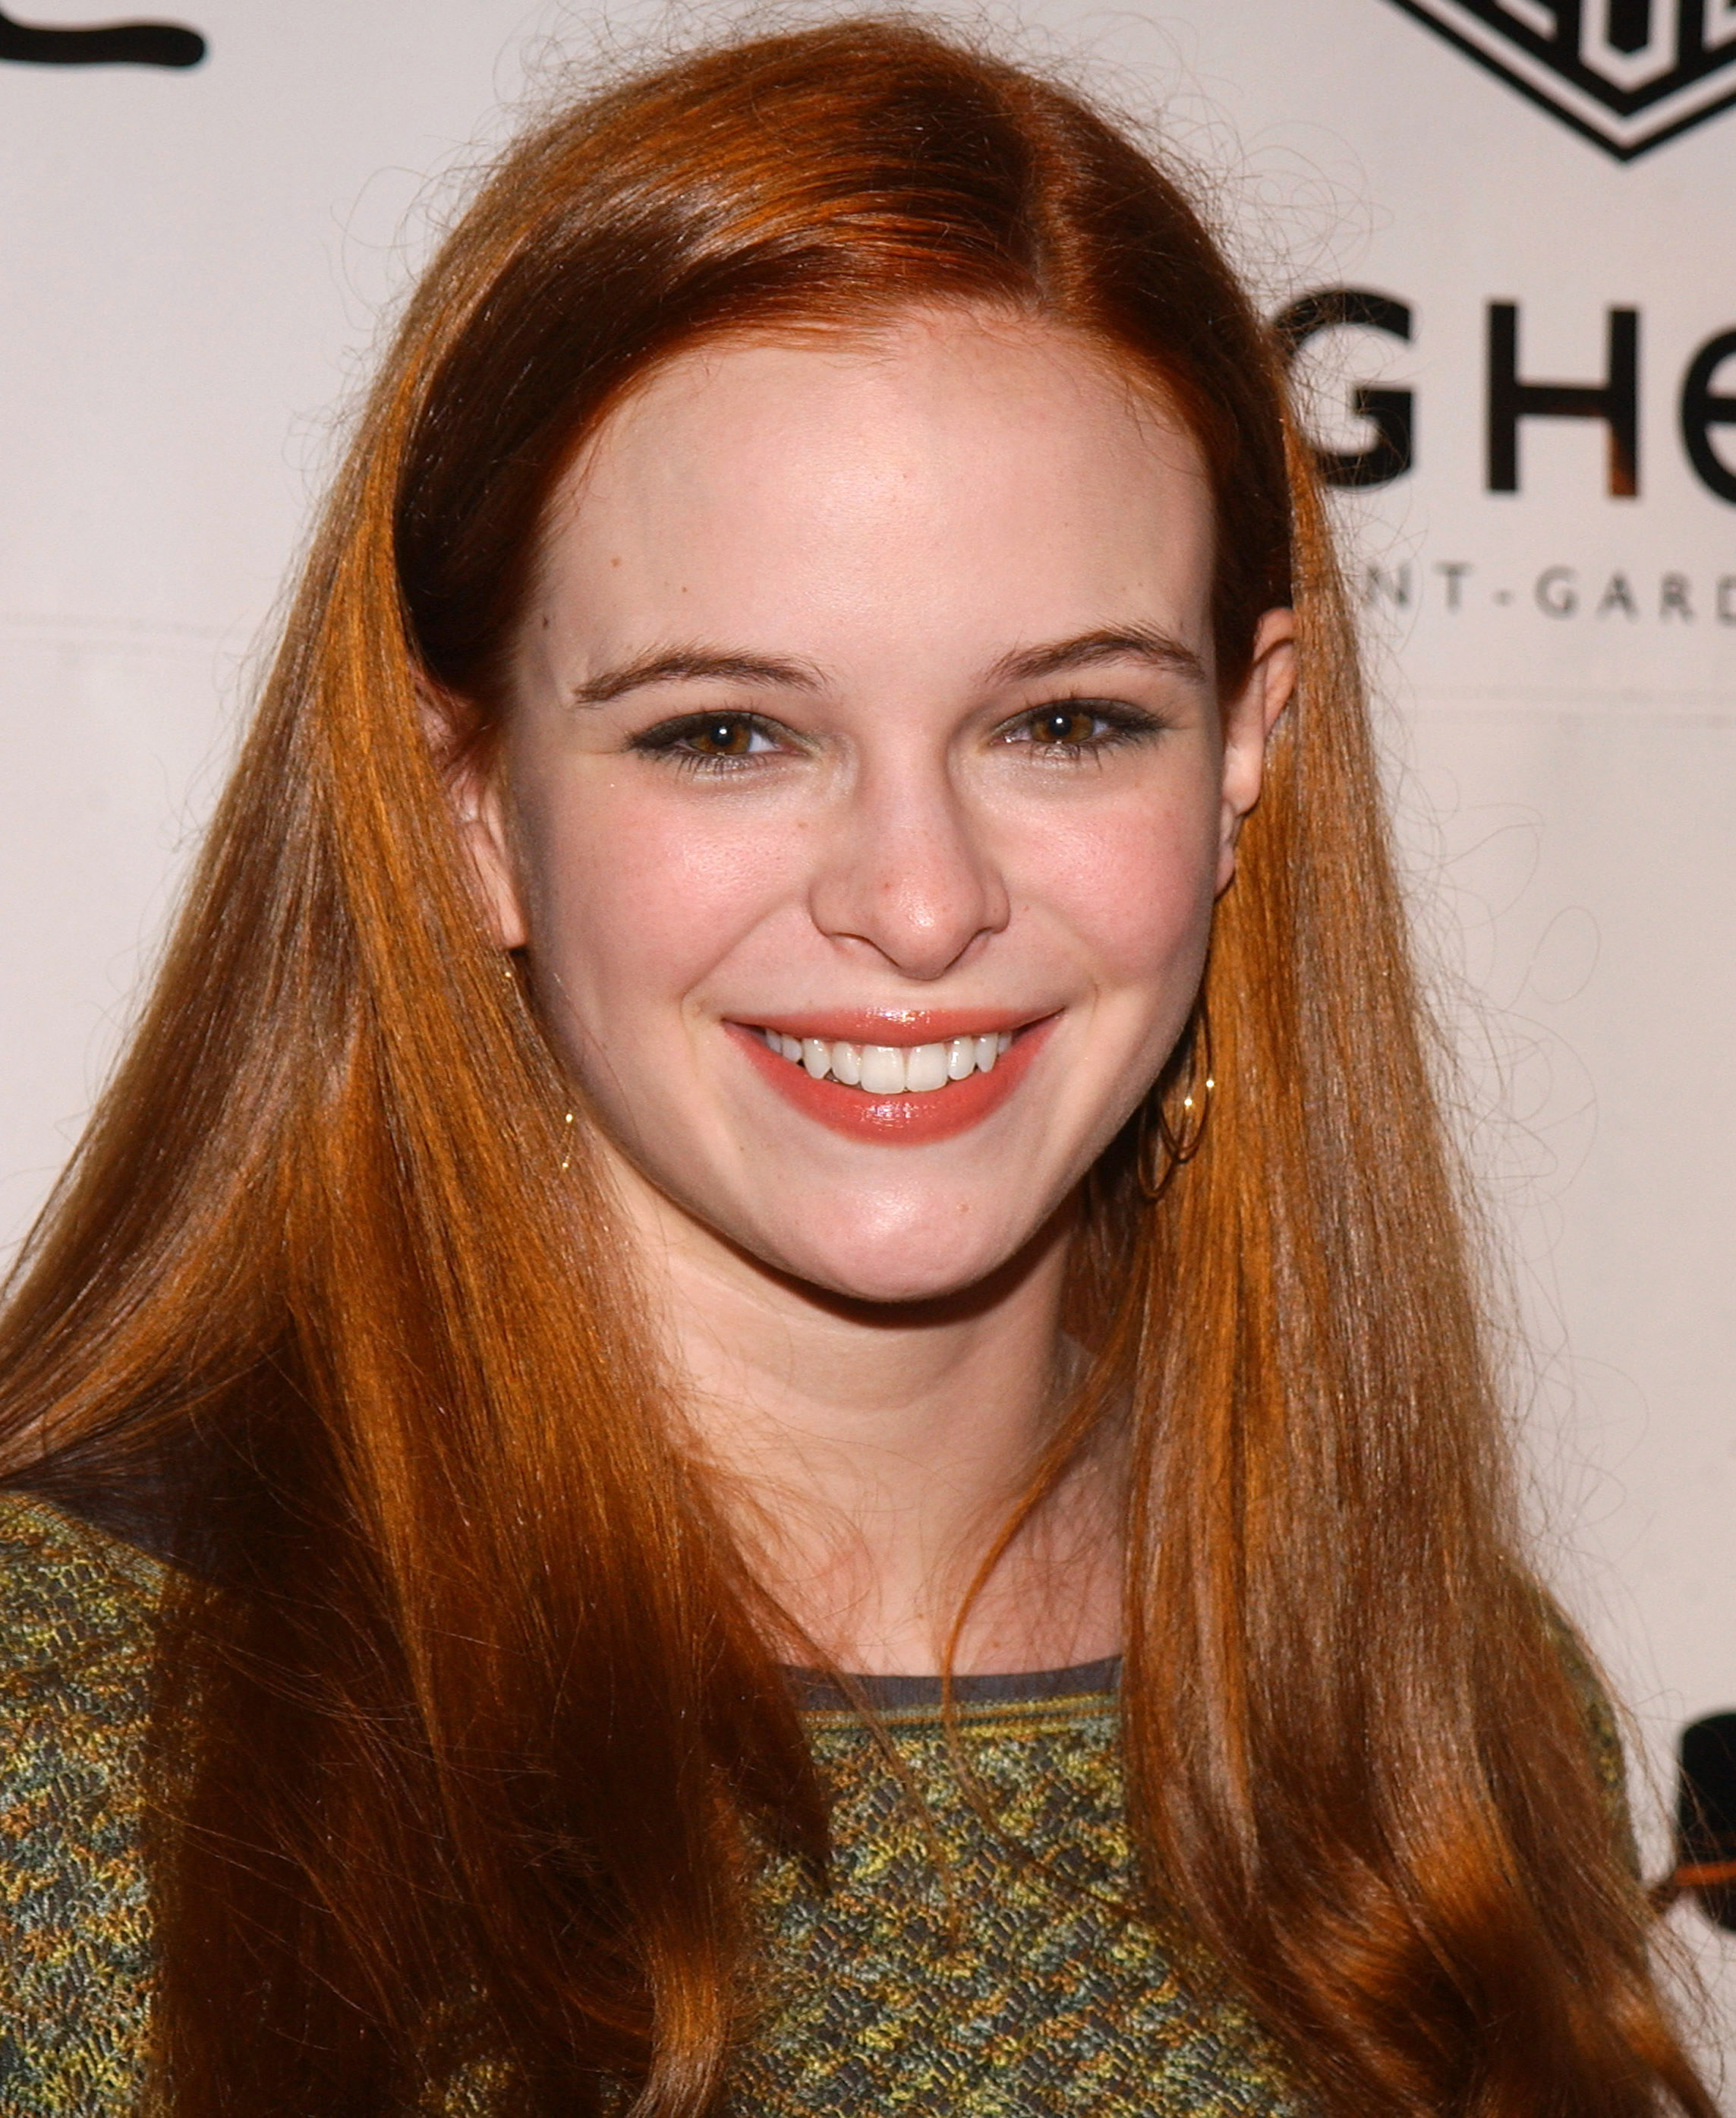 A 2004 red carpet photo of Danielle Panabaker